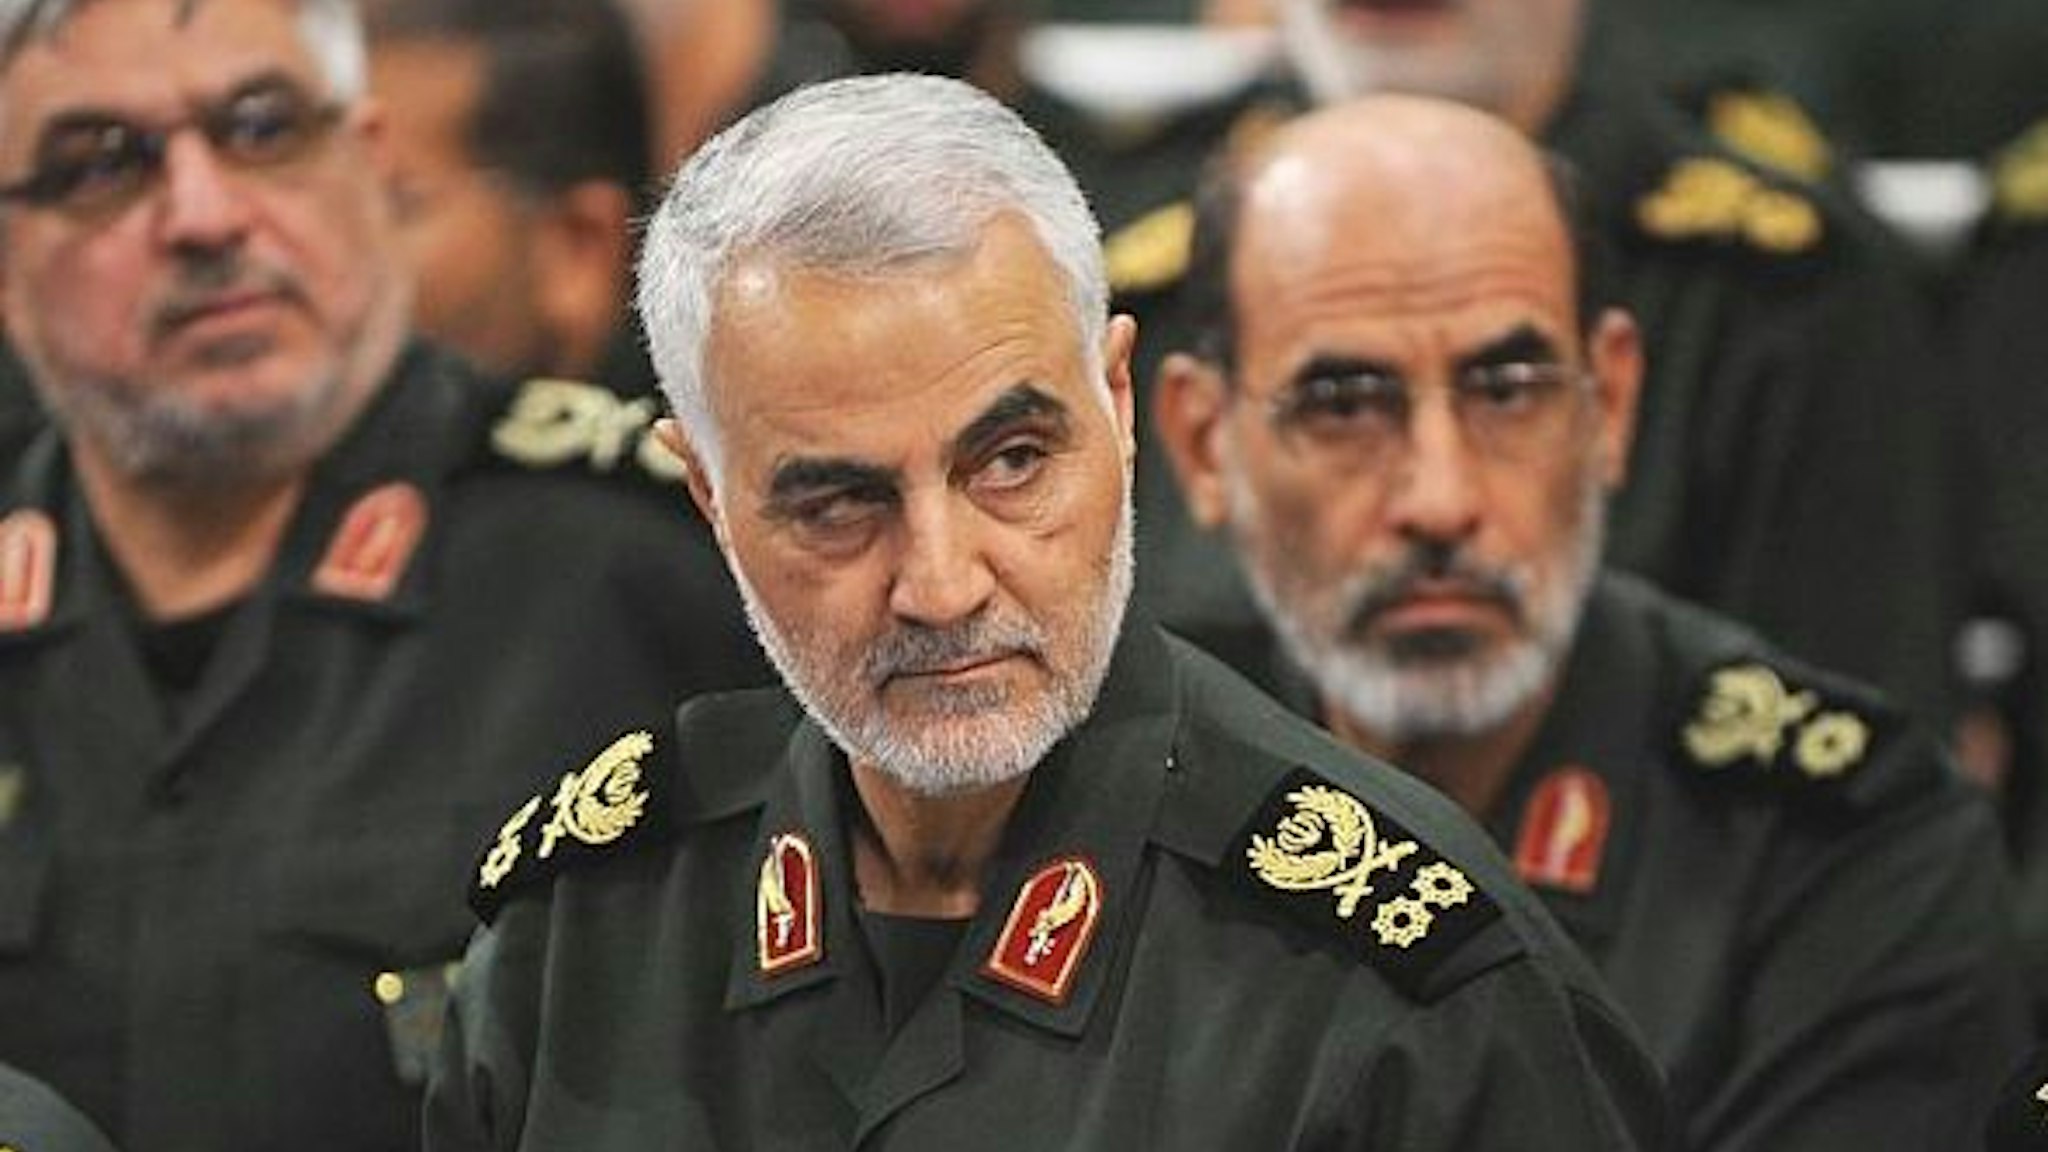 Iranian Quds Force commander Qassem Soleimani (C) attends Iranian supreme leader Ayatollah Ali Khamenei's (not seen) meeting with the Islamic Revolution Guards Corps (IRGC) in Tehran, Iran on September 18, 2016. (Photo by Pool / Press Office of Iranian Supreme Leader/Anadolu Agency/Getty Images)